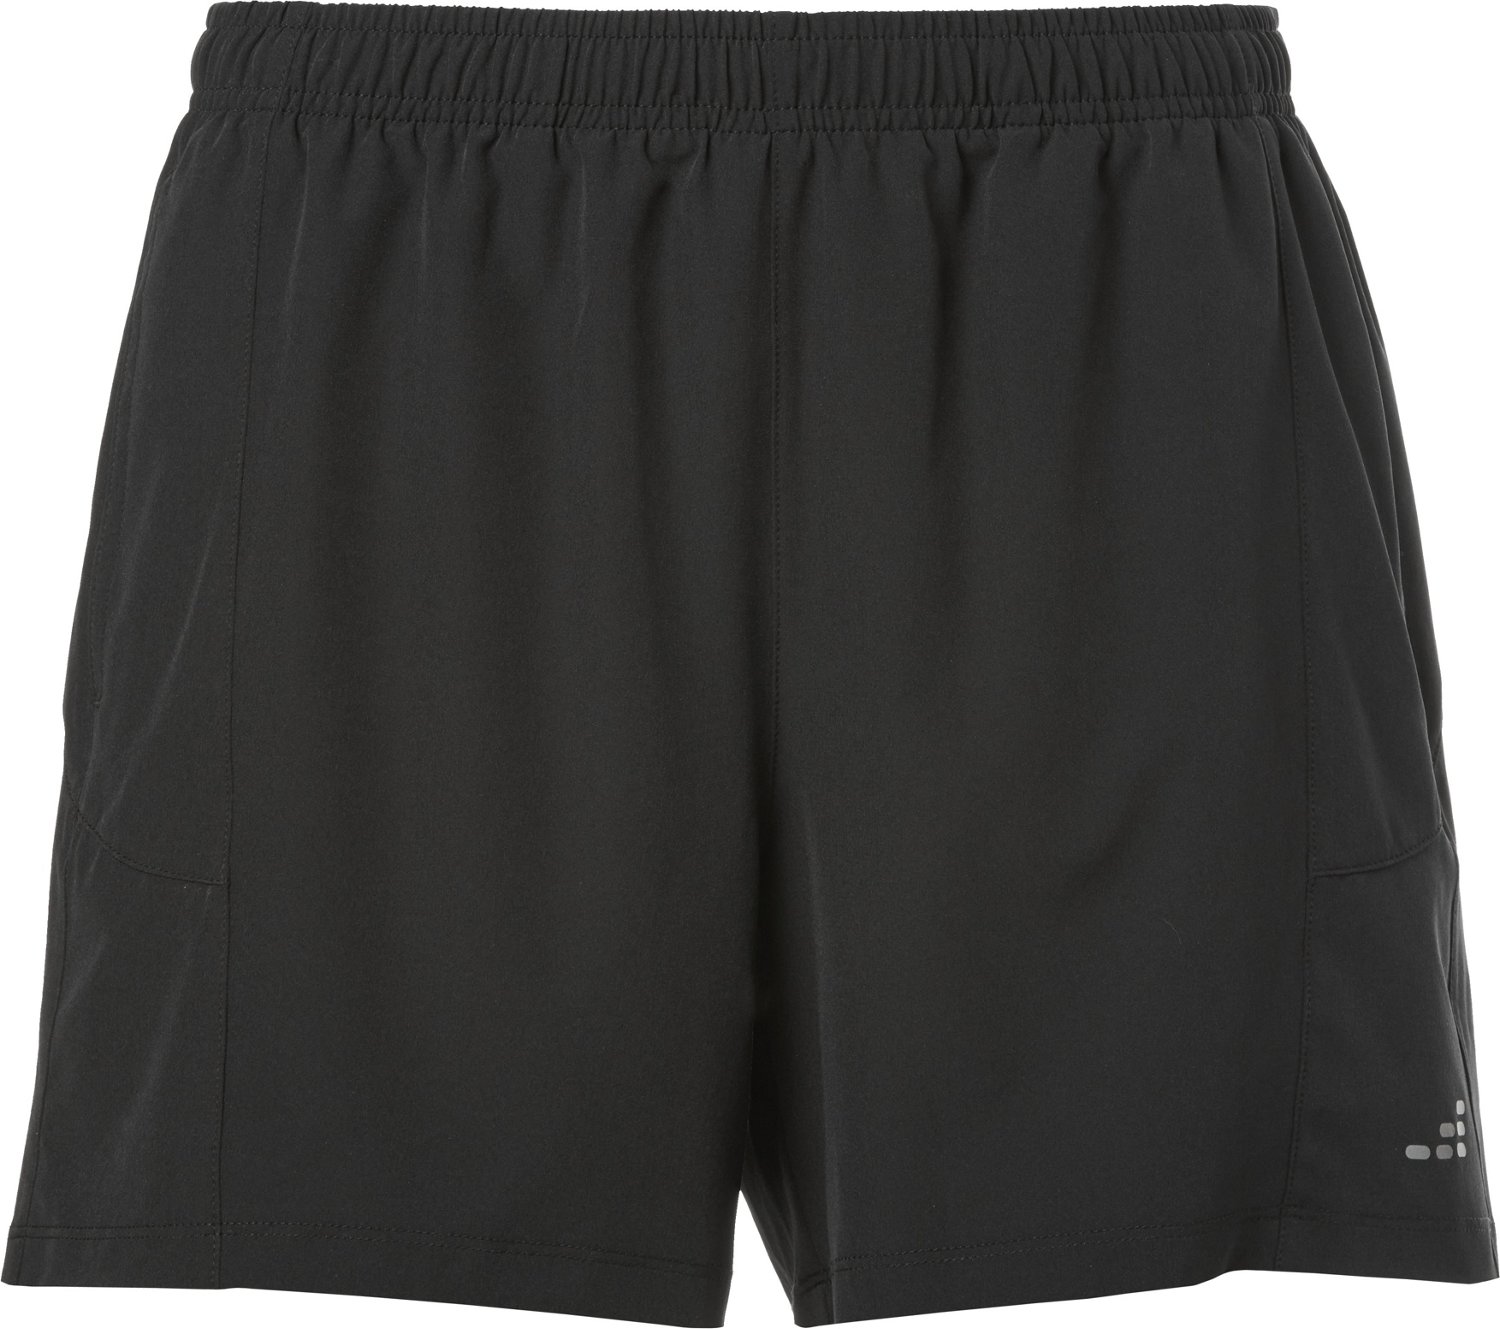 Under Armour Shorts Womens Extra Small Black Outdoors Runner Outdoor Ladies